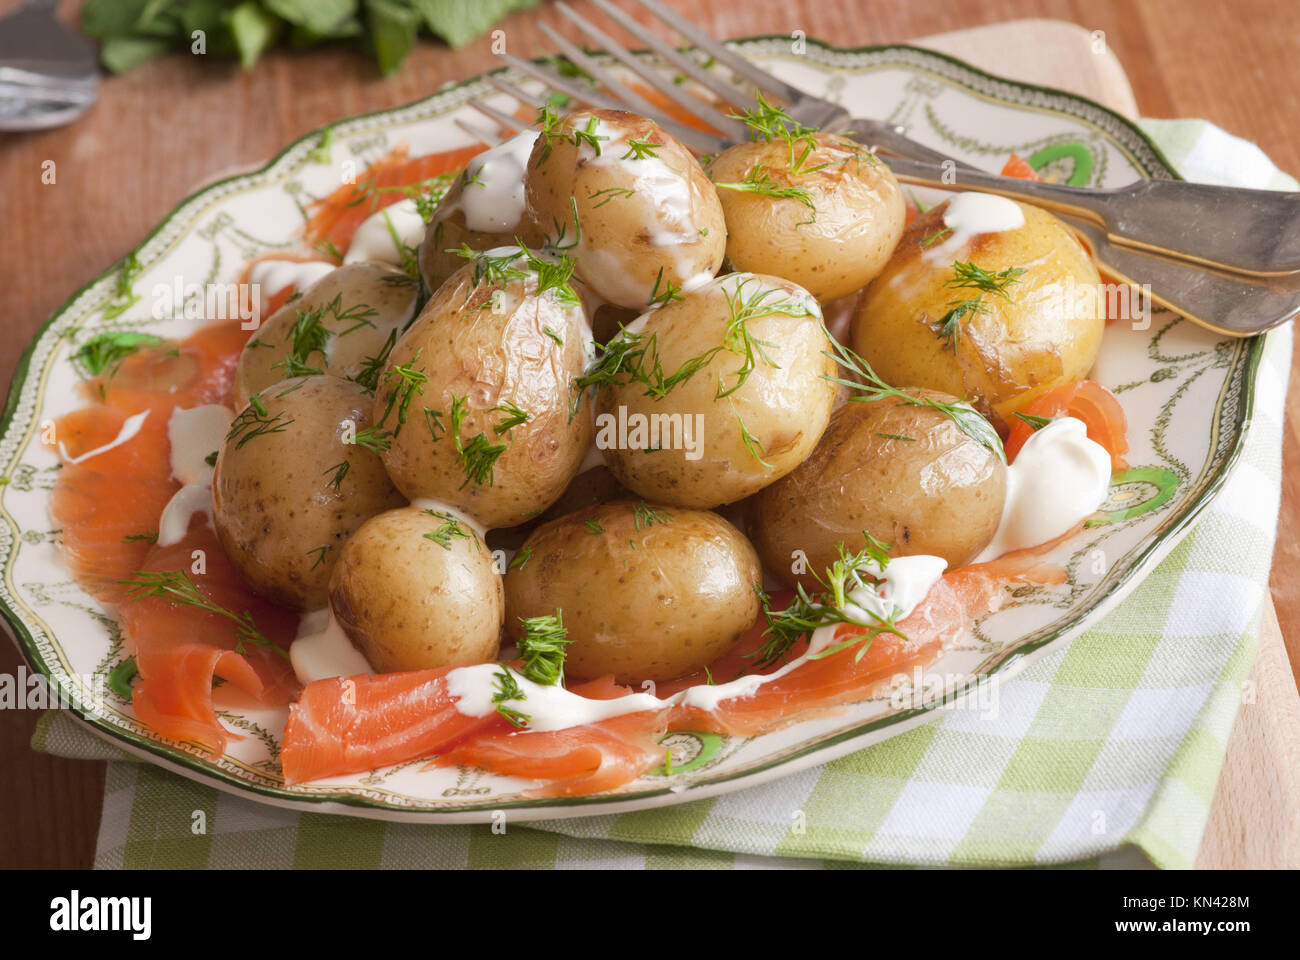 New potatoes with smoked salmon and creme fraiche on a plate. Stock Photo